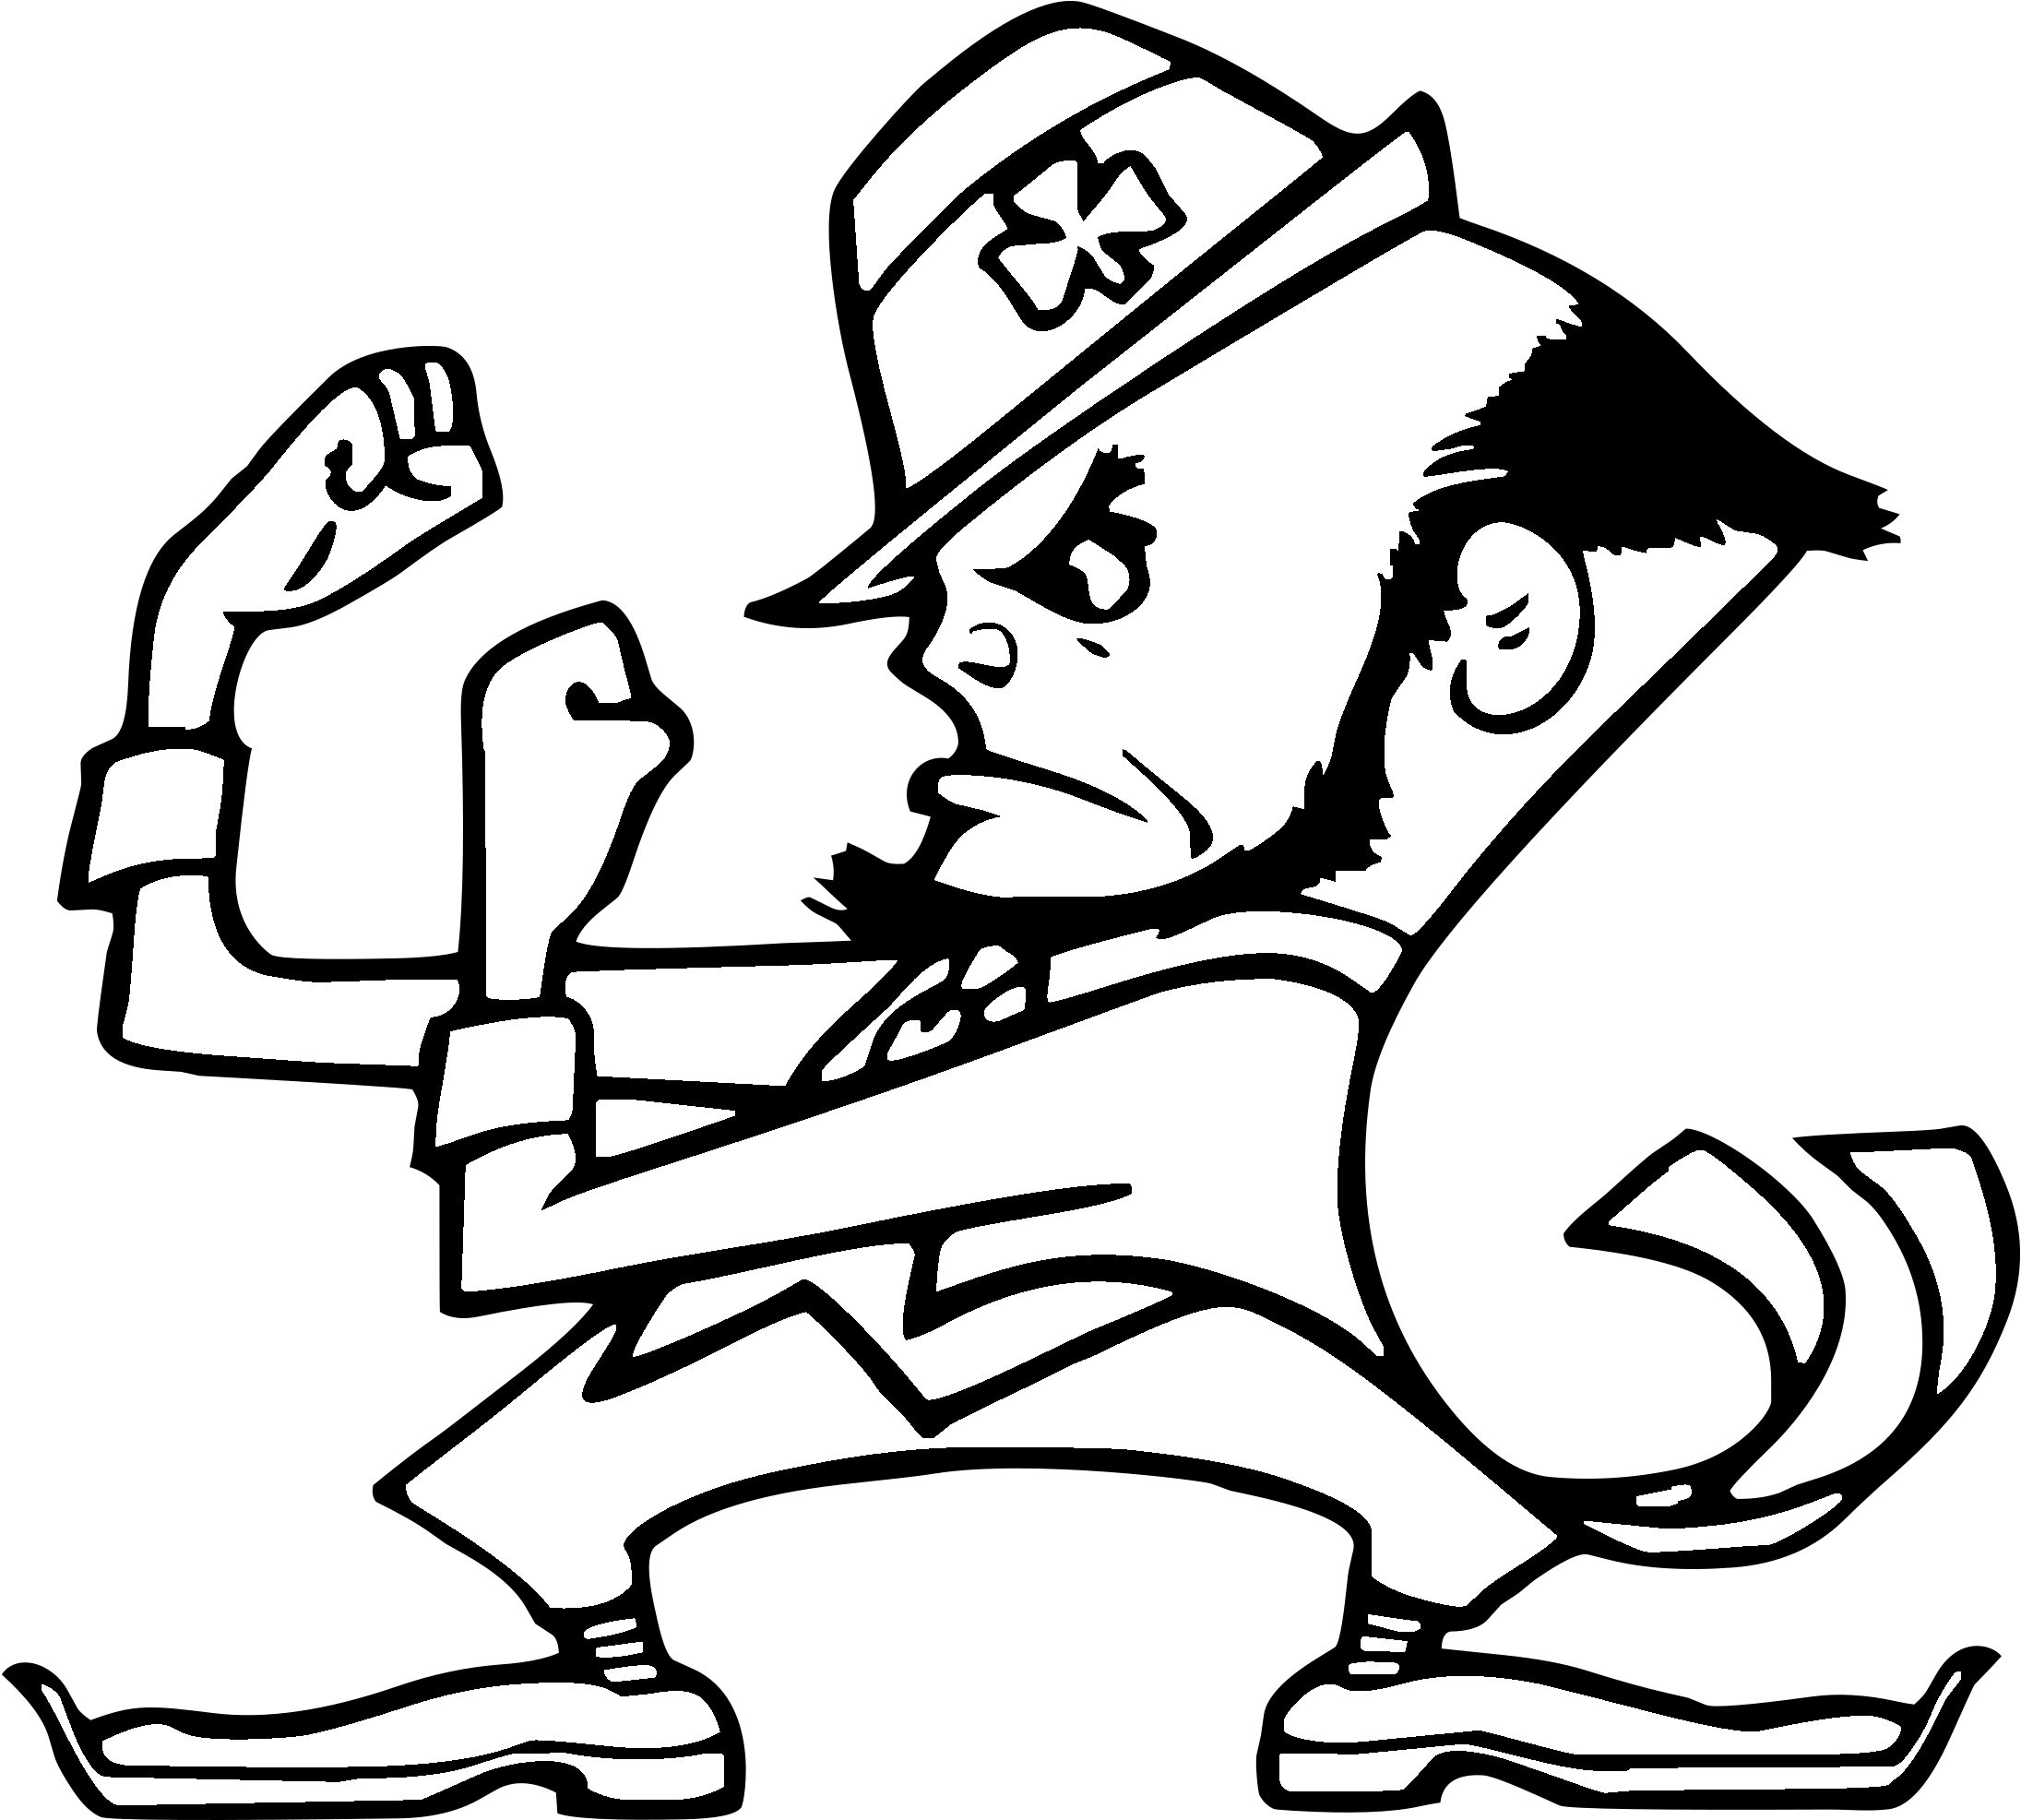 A Cartoon Of A Man With A Hat And A Clover Leaf